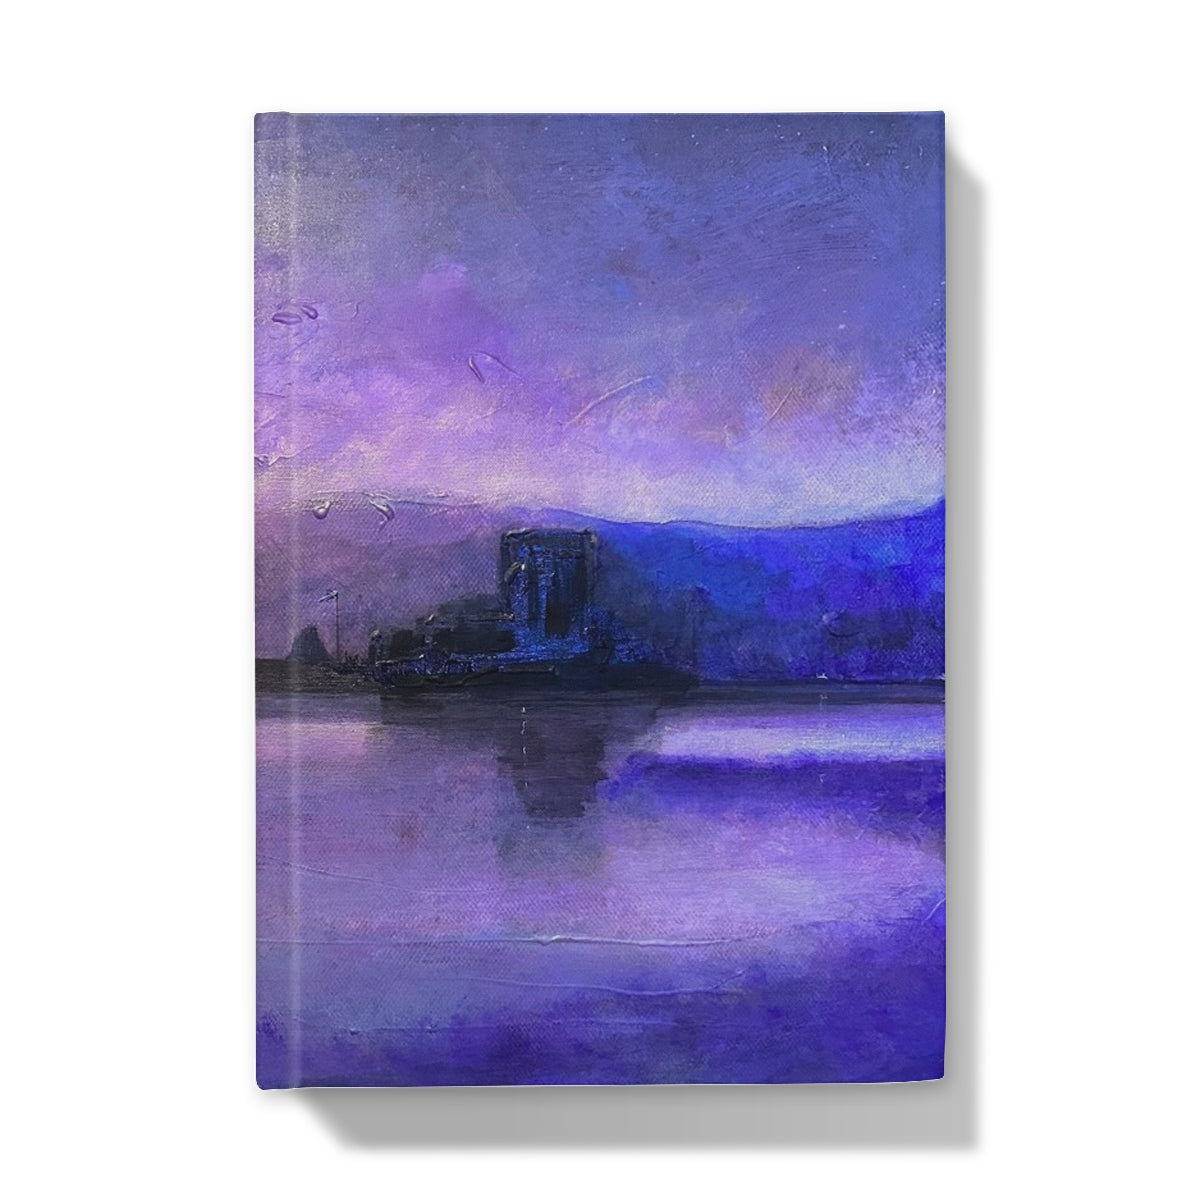 Eilean Donan Castle Moonset Art Gifts Hardback Journal-Journals & Notebooks-Historic & Iconic Scotland Art Gallery-A4-Lined-Paintings, Prints, Homeware, Art Gifts From Scotland By Scottish Artist Kevin Hunter